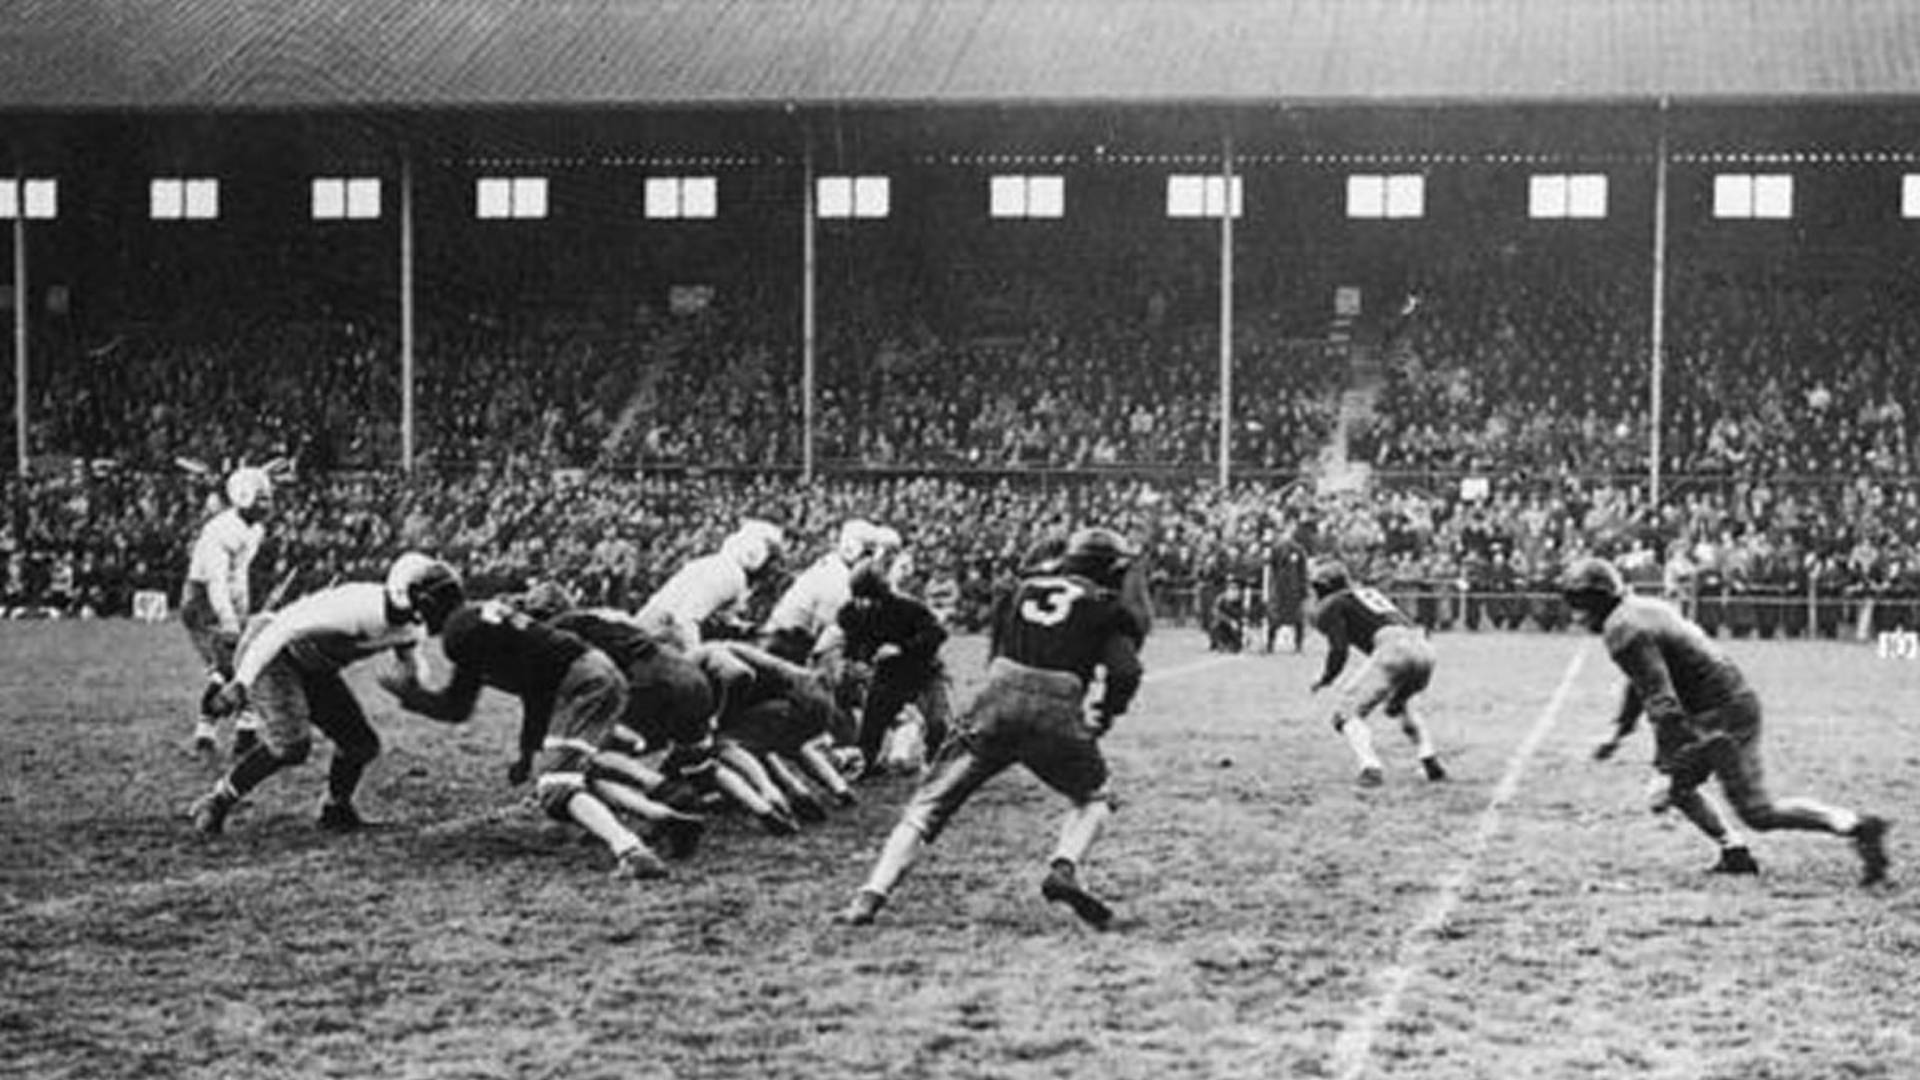 United States military teams 'Yarvard' and 'Hale' compete in the first game of American Football played in the European Theater of Operations during the Second World War. 'Hale' won the encounter 9-7 at Ravenhill Stadium, Belfast on 14th November 1942.